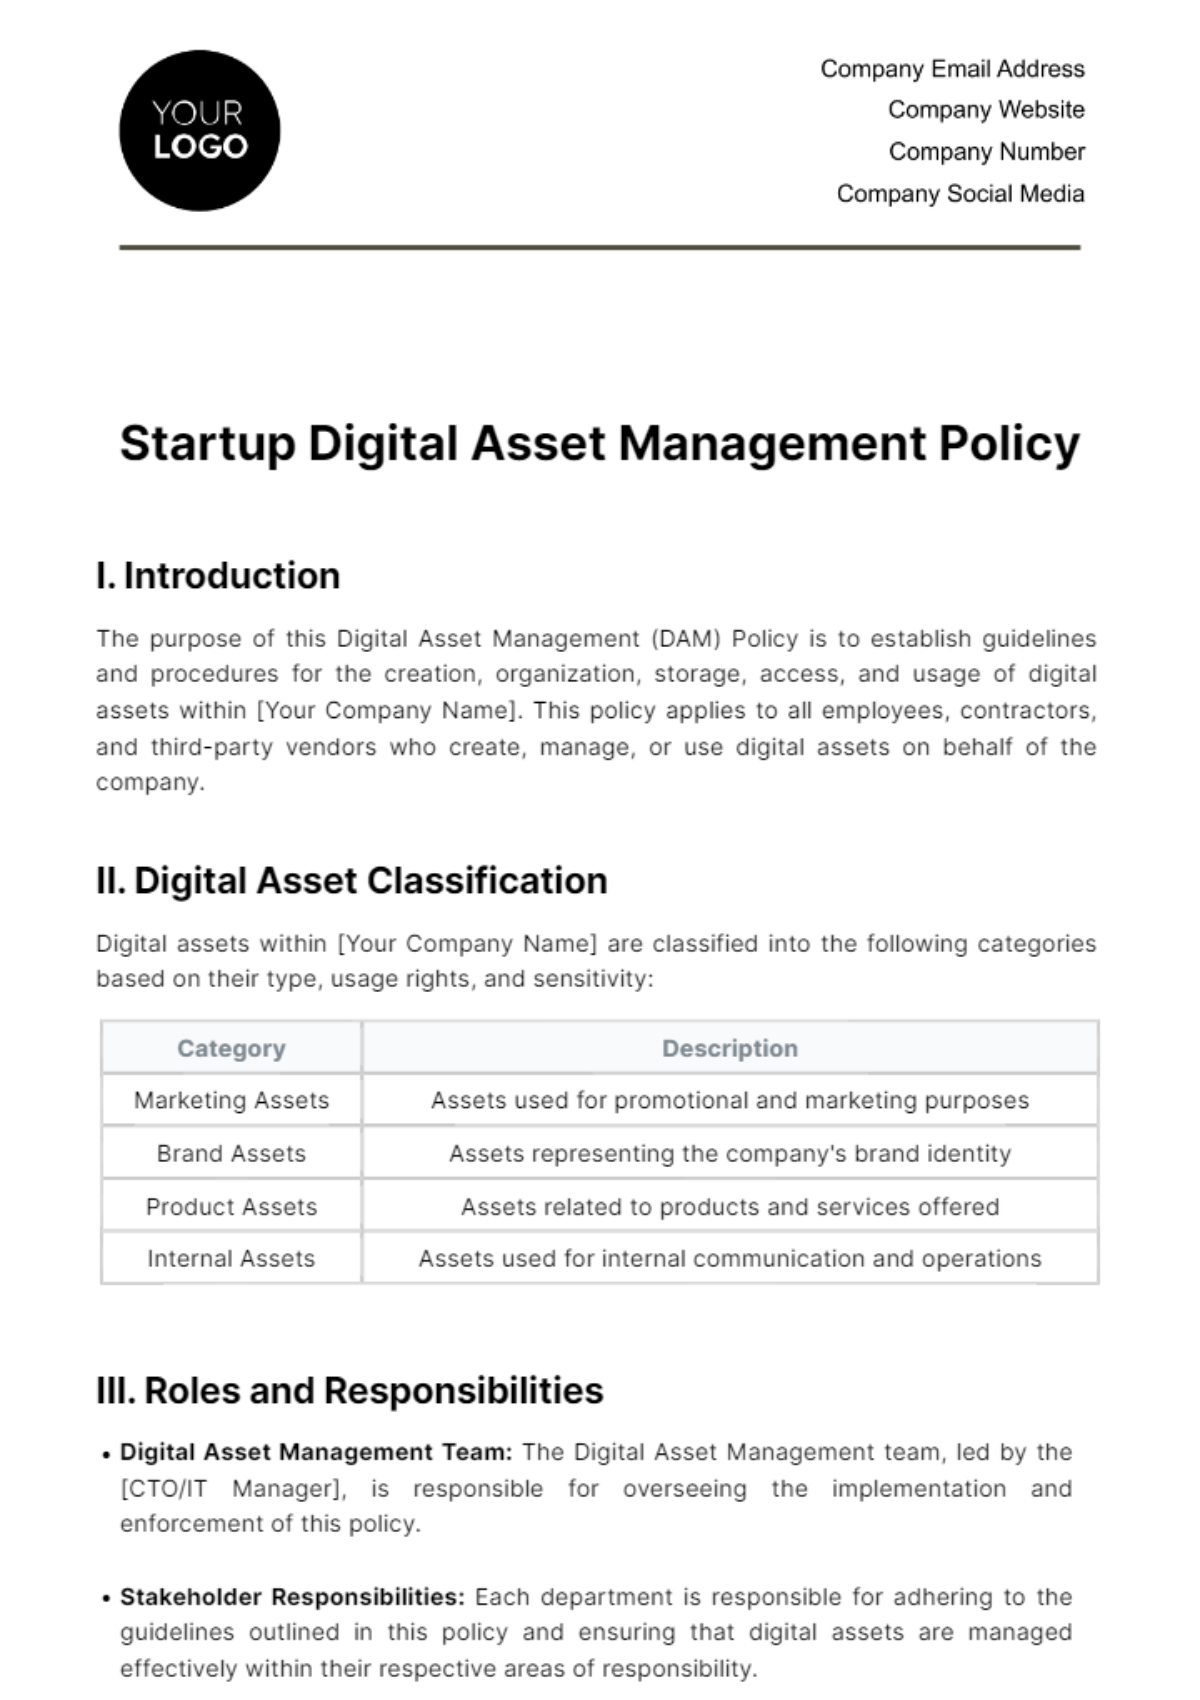 Free Startup Digital Asset Management Policy Template